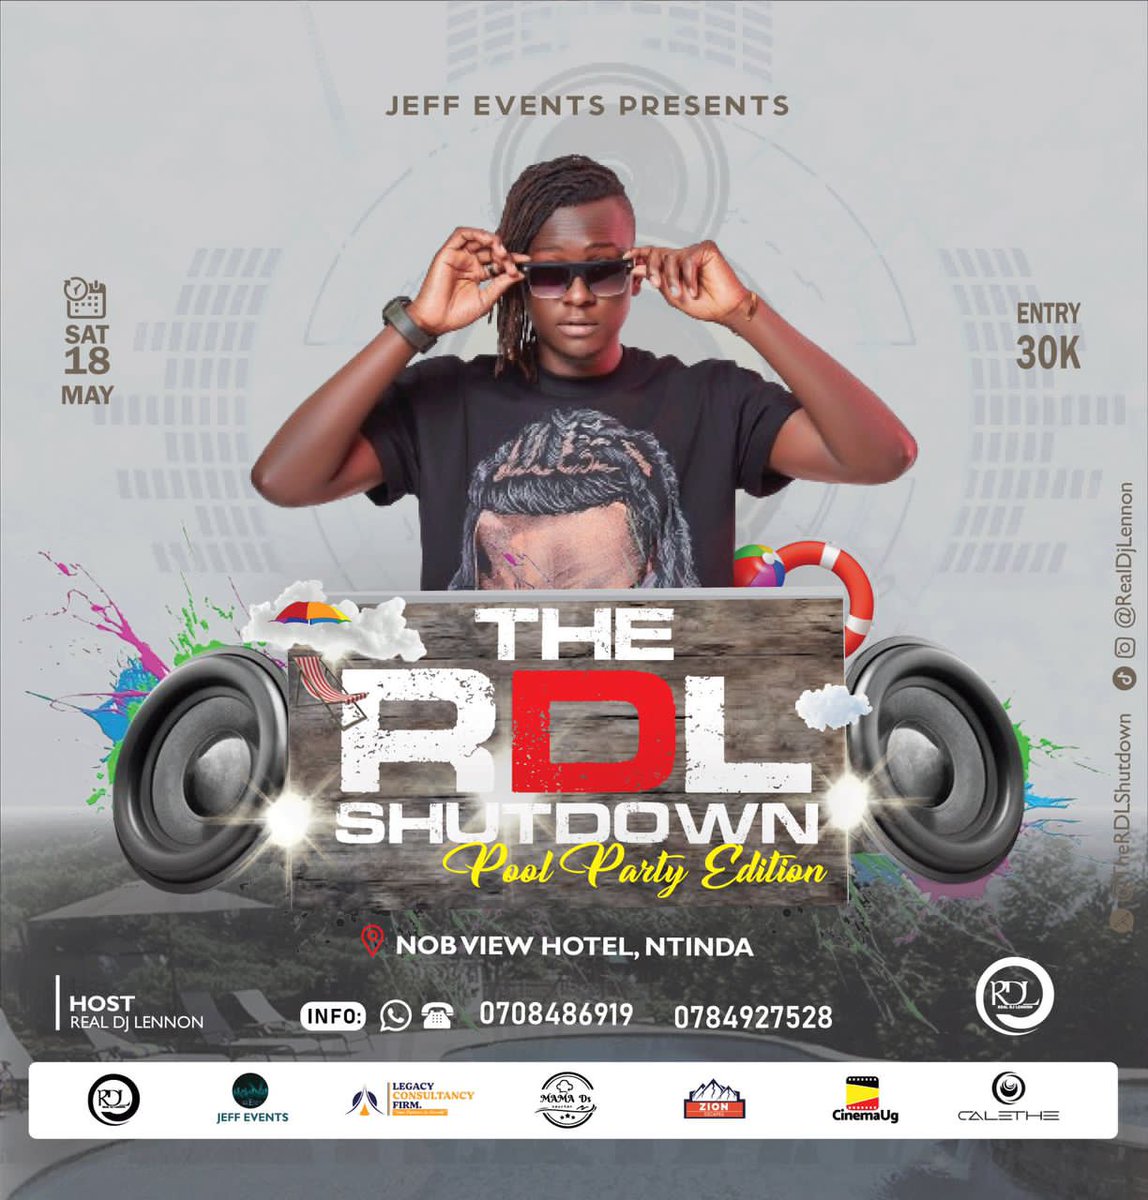 Abulungi bakuno don't miss #TheRDLShutdown happening on 18th May at Nob View Hotel. Tickets are 30K .